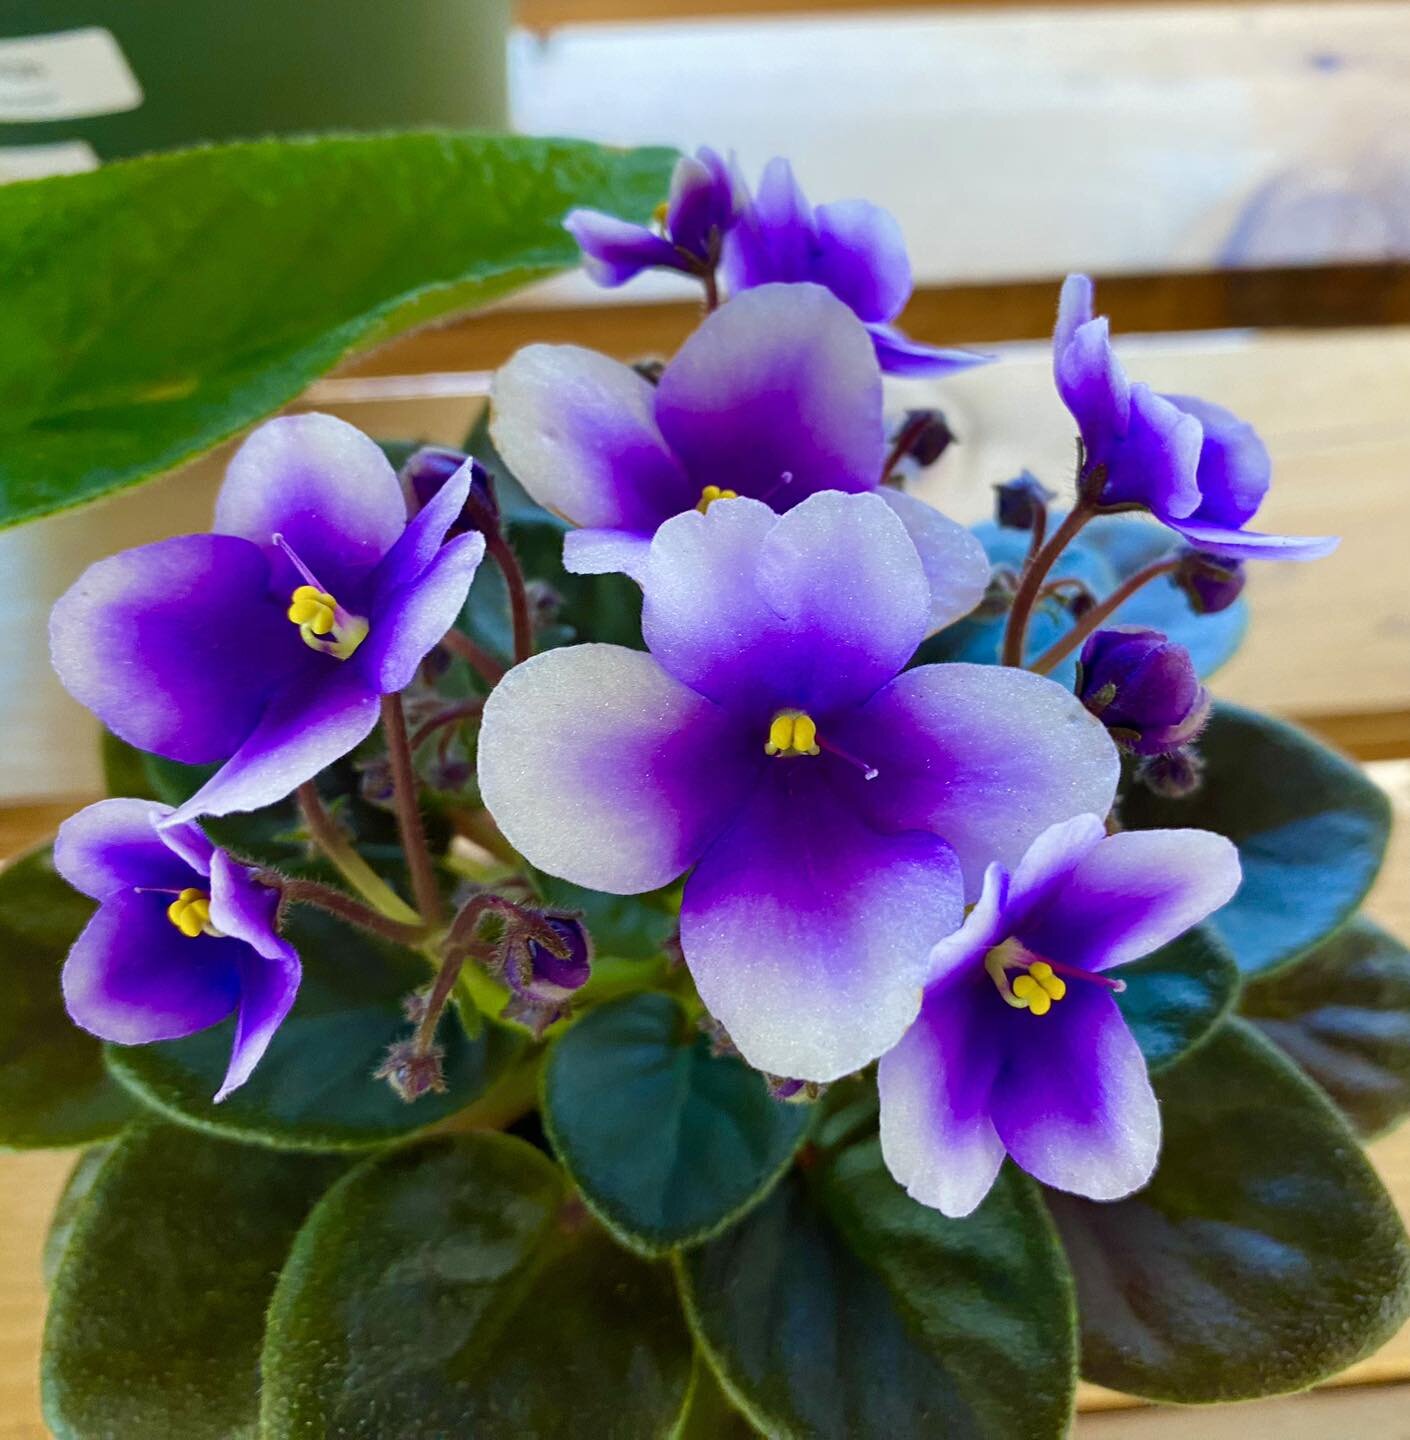 We have African Violets and Streptocarpus in the the store.  They are vibrant house plants.